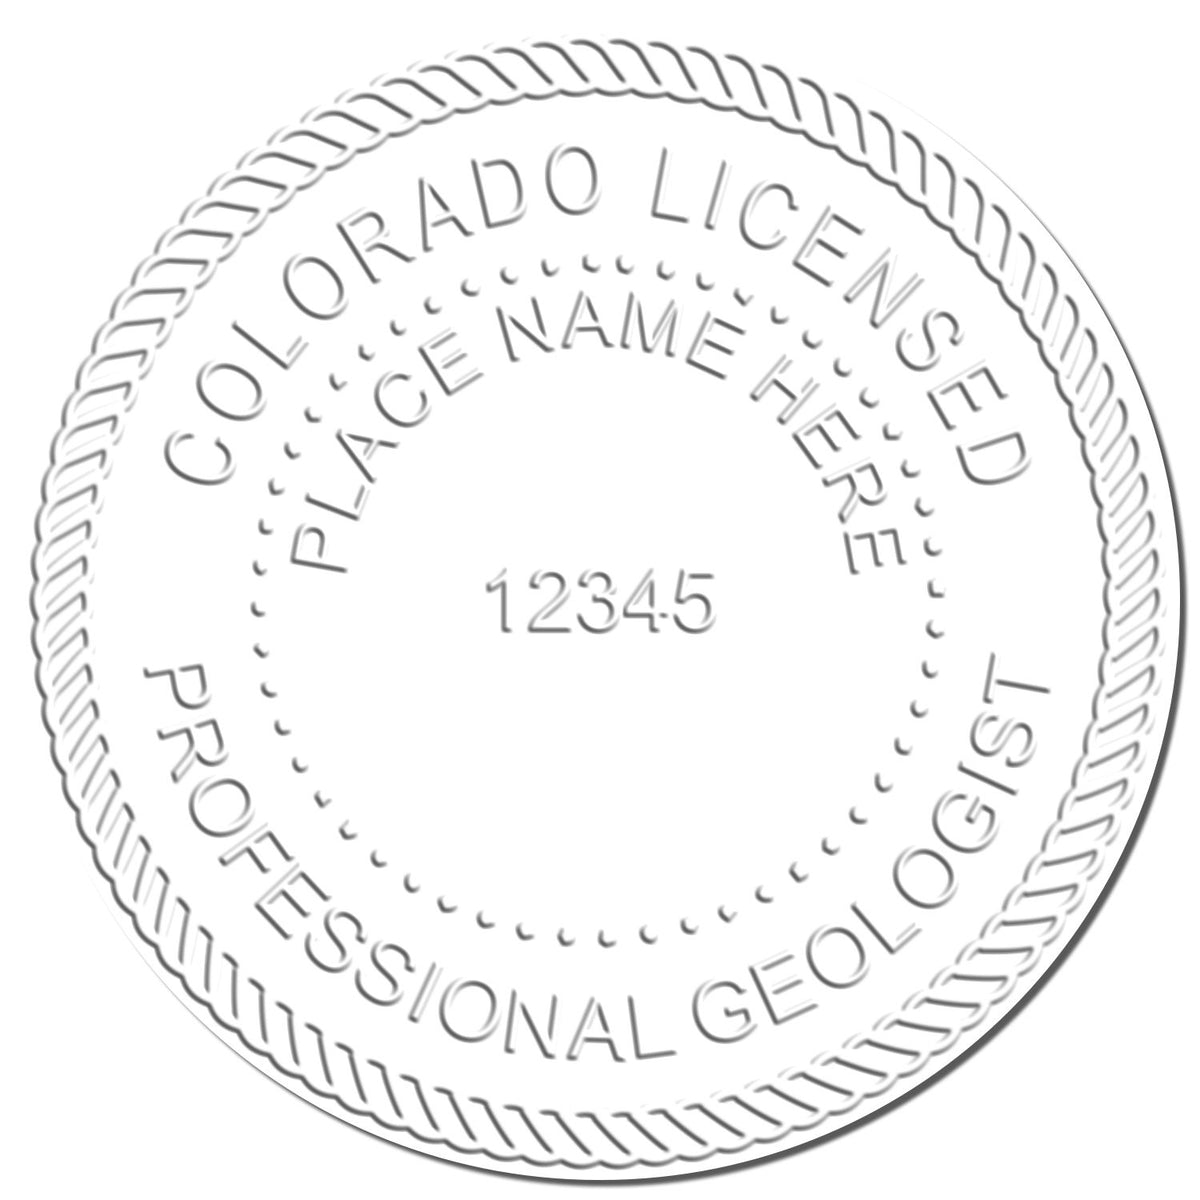 A stamped imprint of the Soft Colorado Professional Geologist Seal in this stylish lifestyle photo, setting the tone for a unique and personalized product.